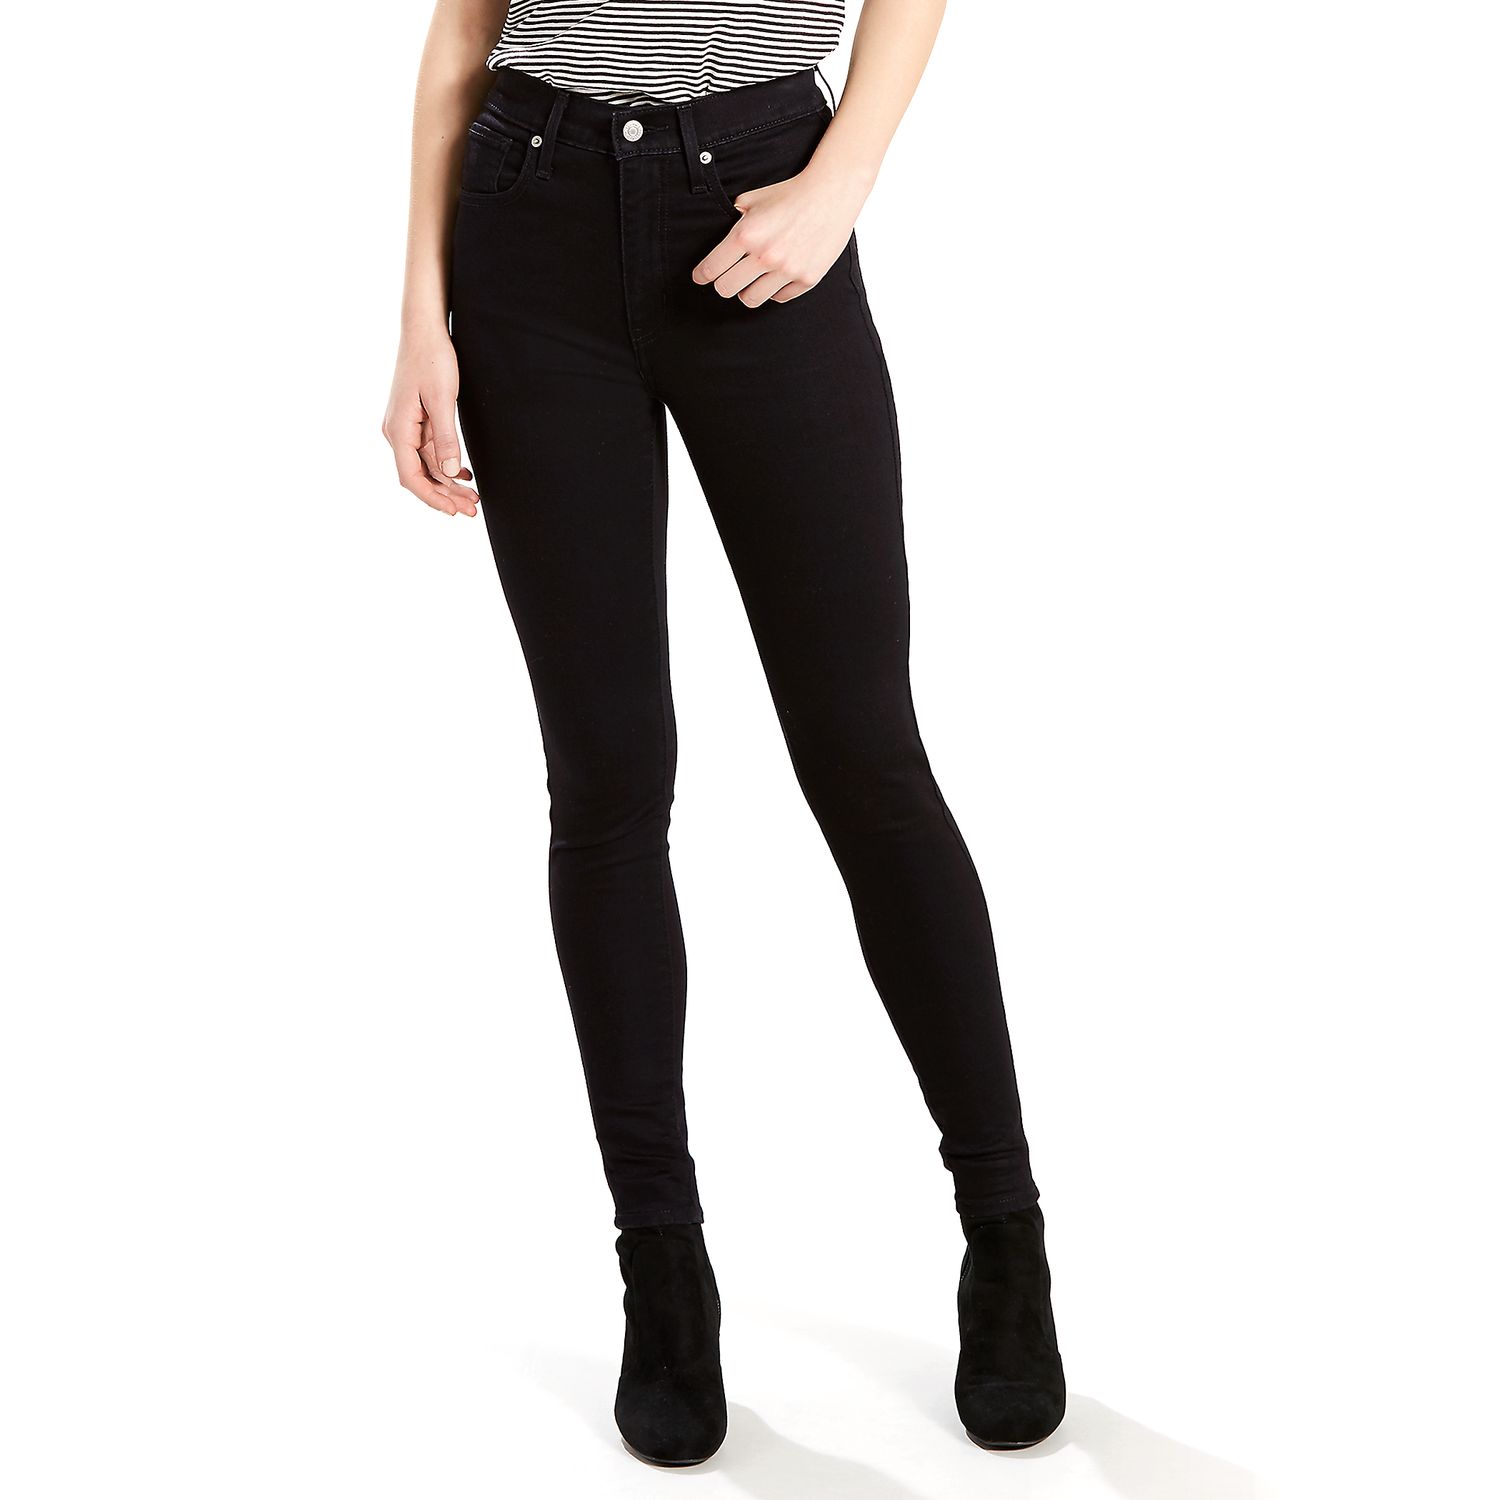 mile high rise jeans